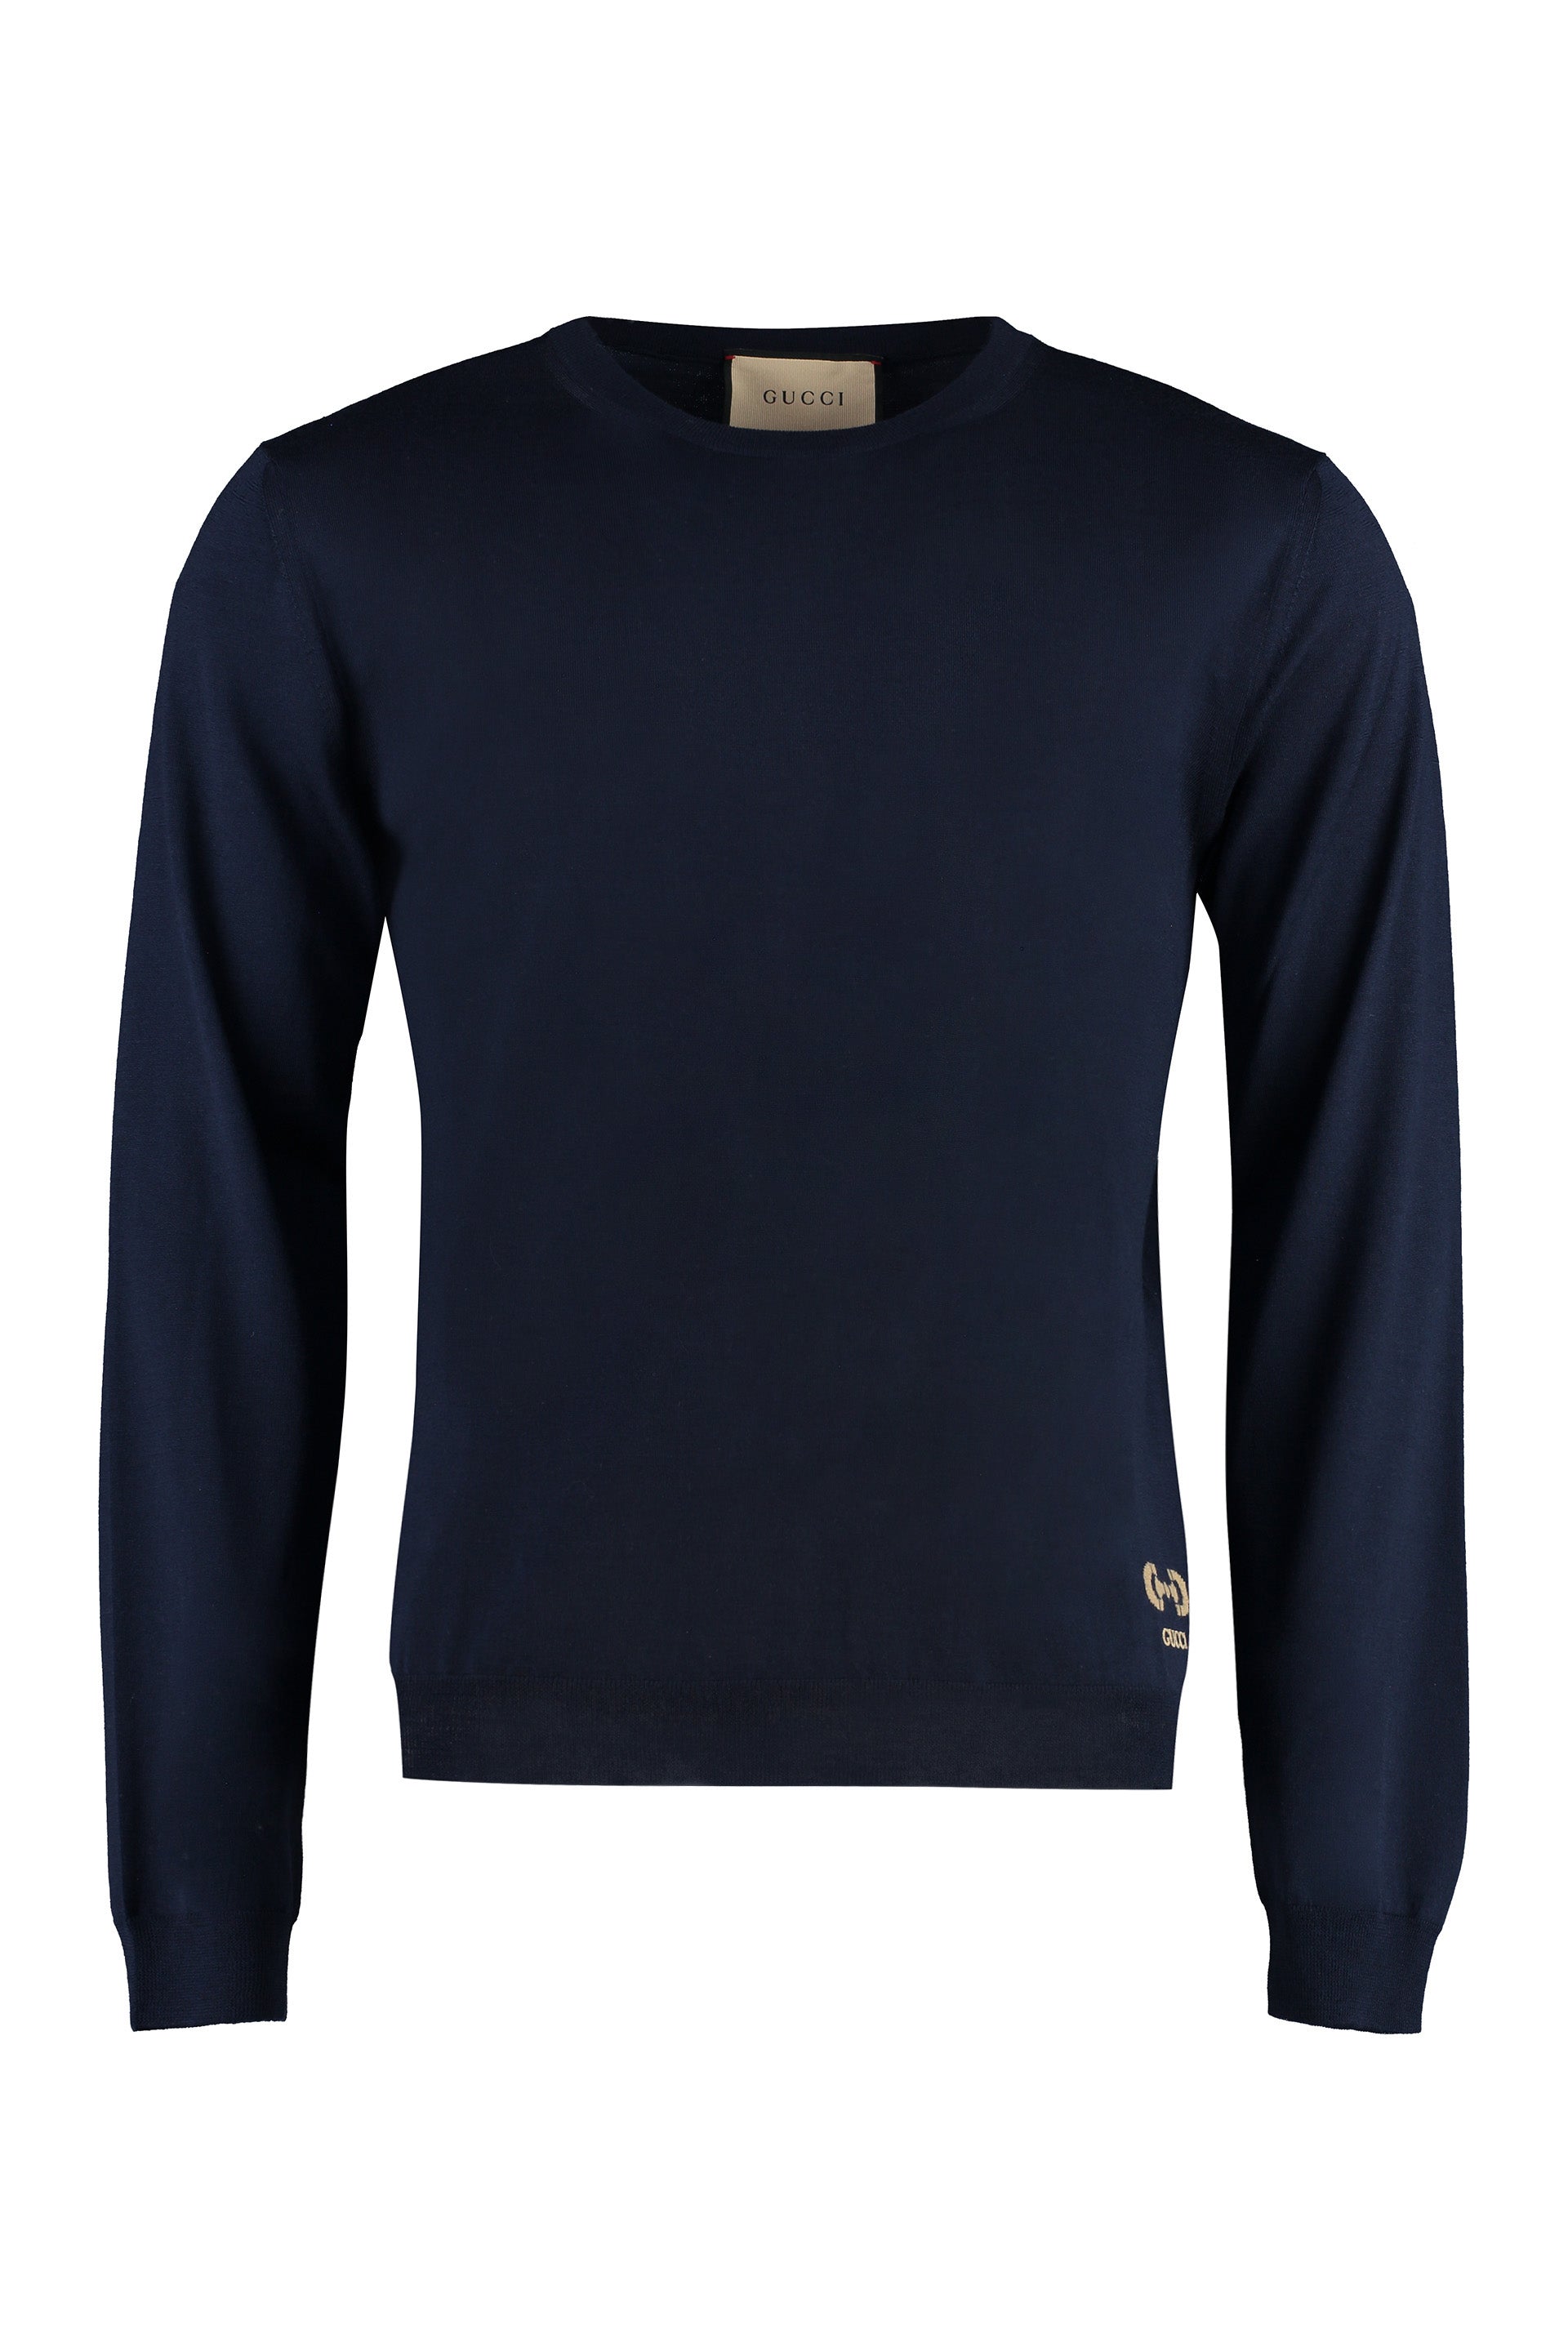 Gucci Men's Blue Ribbed Wool Crew-neck Sweater